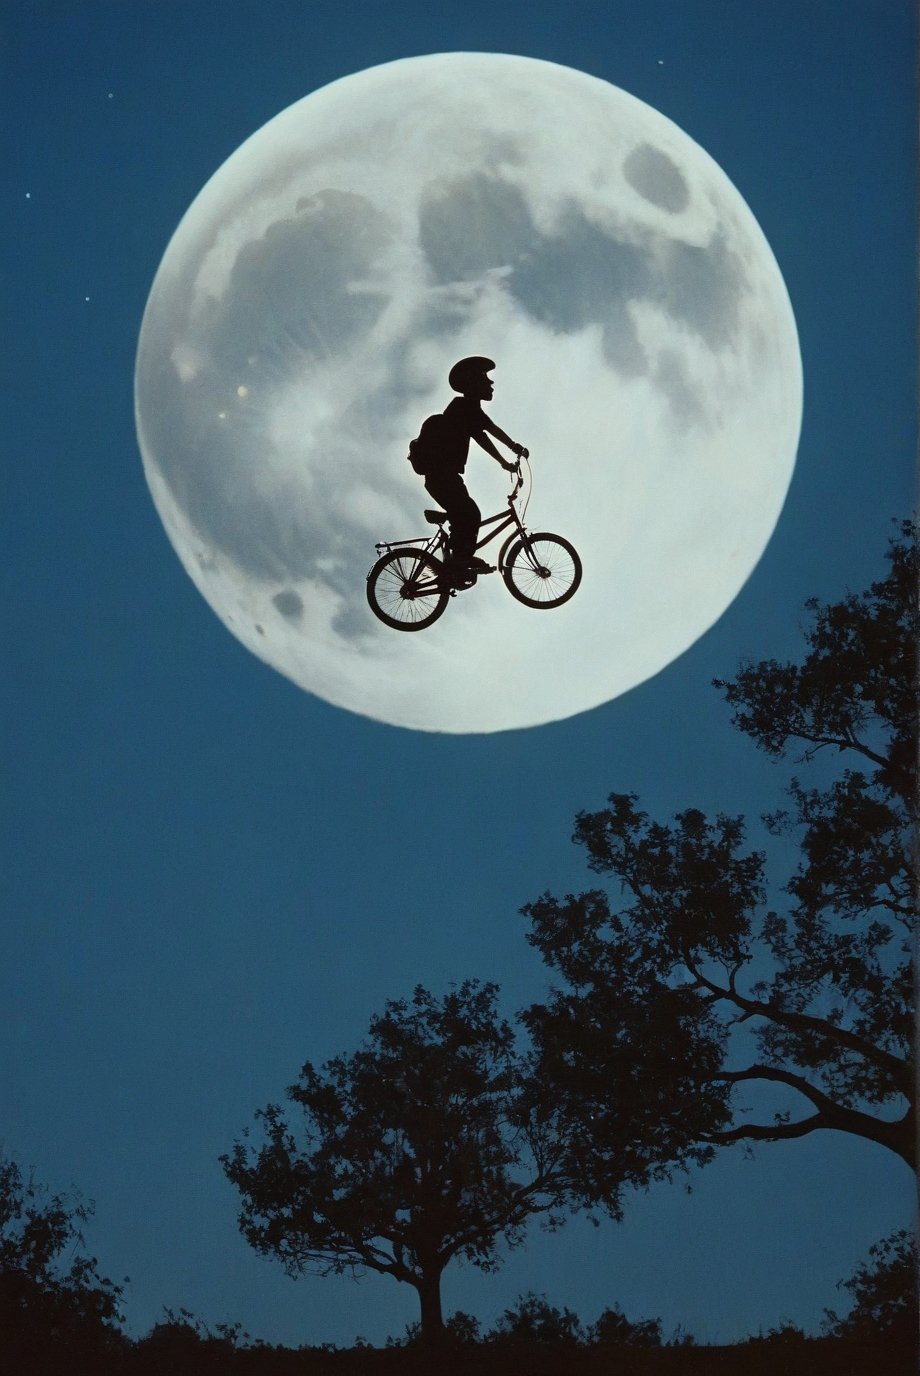 cinematic film still of 1980's style, In the 1980's the silhoutte of a person hovering on a bike in the air with full moon in background in a scene from et movie,1boy,monochrome,outdoors,sky,cloud,tree,night,moon,ground vehicle,star (sky),scenery,full moon,blue theme,silhouette,planet,bicycle,wheelchair , realistic,realism, detailed, perfection,perfect,filmic,retro,vintage,classic,different haircut,different look,different style,different people, 1980's style , 1980 style, shallow depth of field, vignette, highly detailed, high budget, bokeh, cinemascope, moody, epic, gorgeous, film grain, grainy